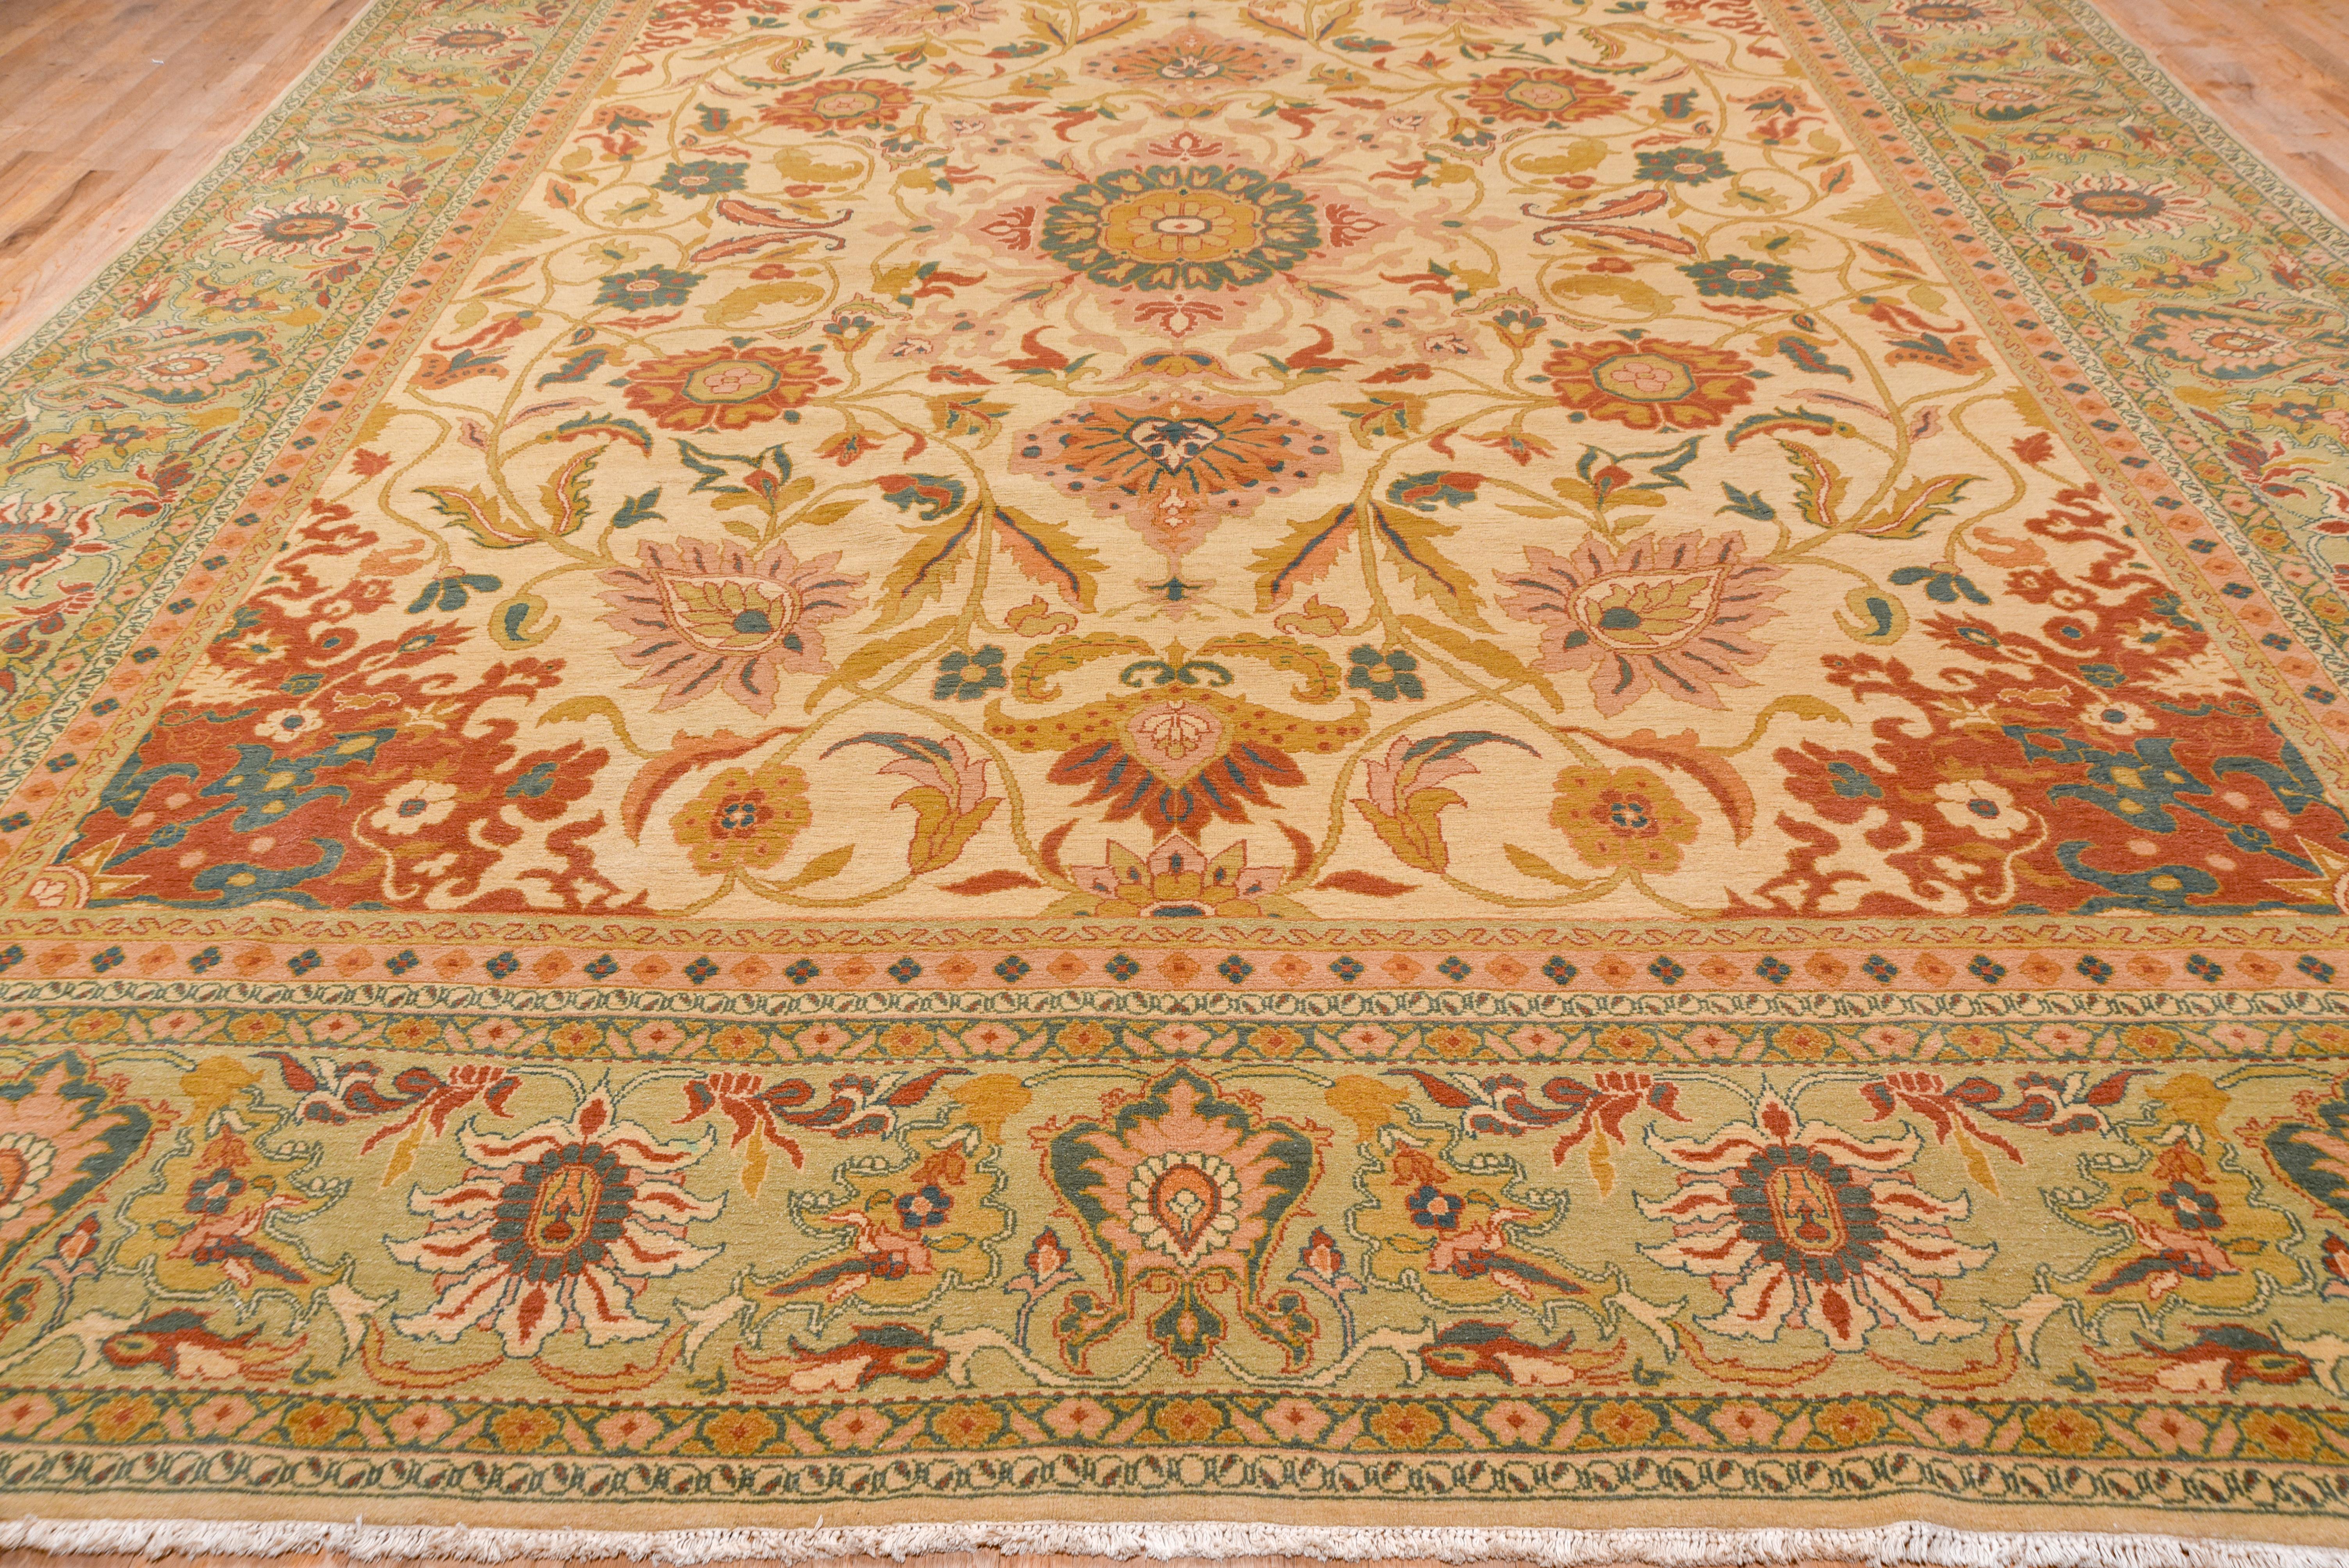 This quite effective modern interpretation of an antique west Persian village carpet shows a pointed octagon central motif with palmette pendants, a surrounding fill of other palmettes, leaves and vines, and flaming floral corners, all on a sandy